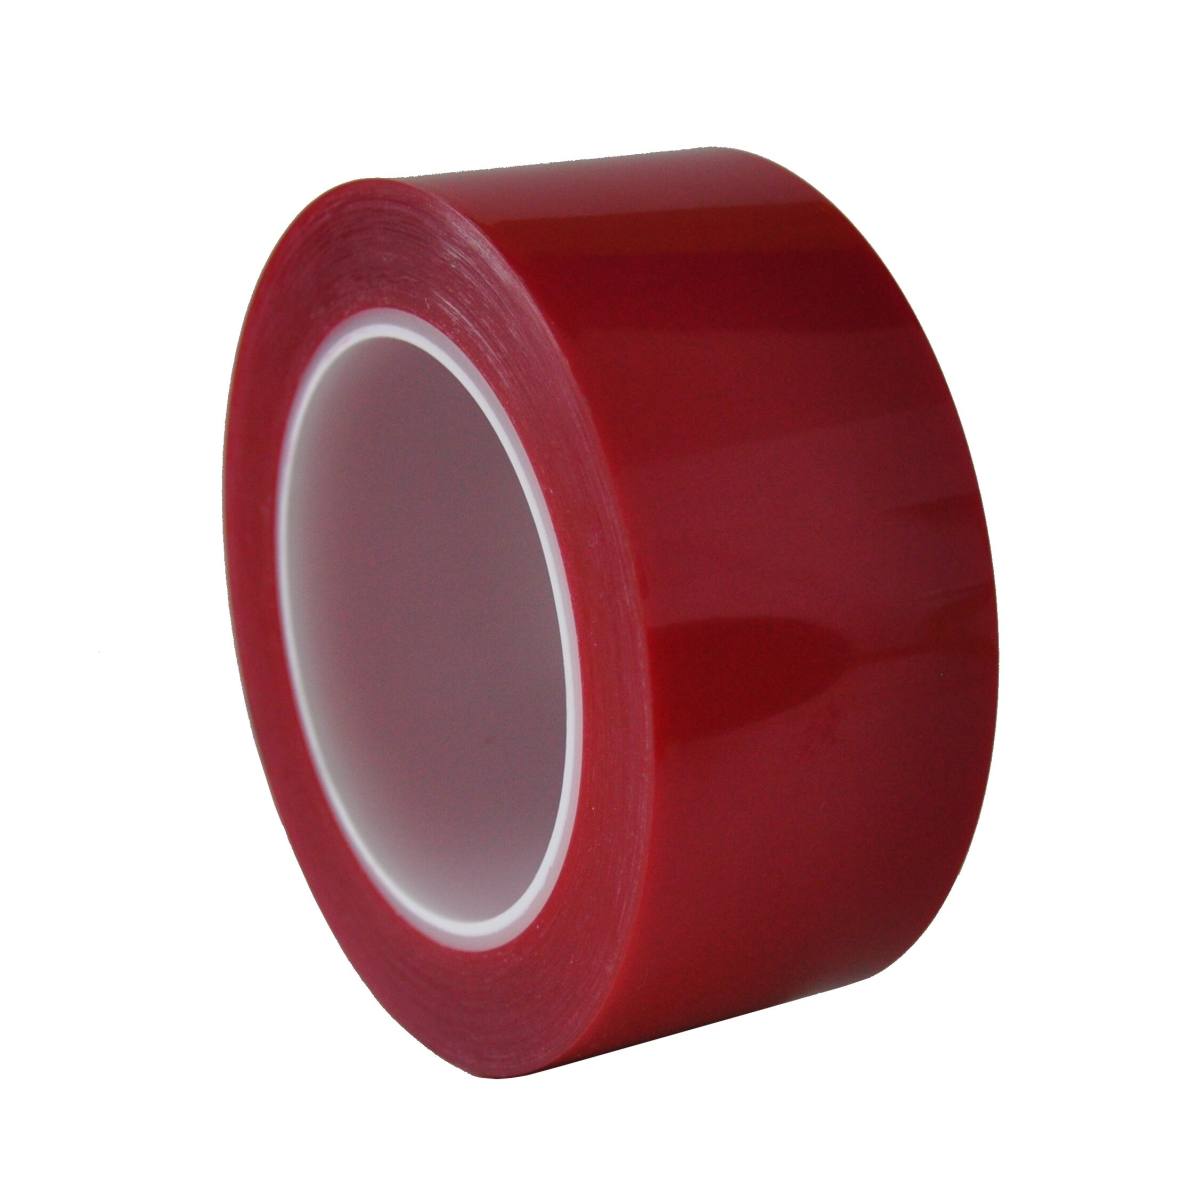 S-K-S 208R polyester adhesive tape, 100mmx66m, red